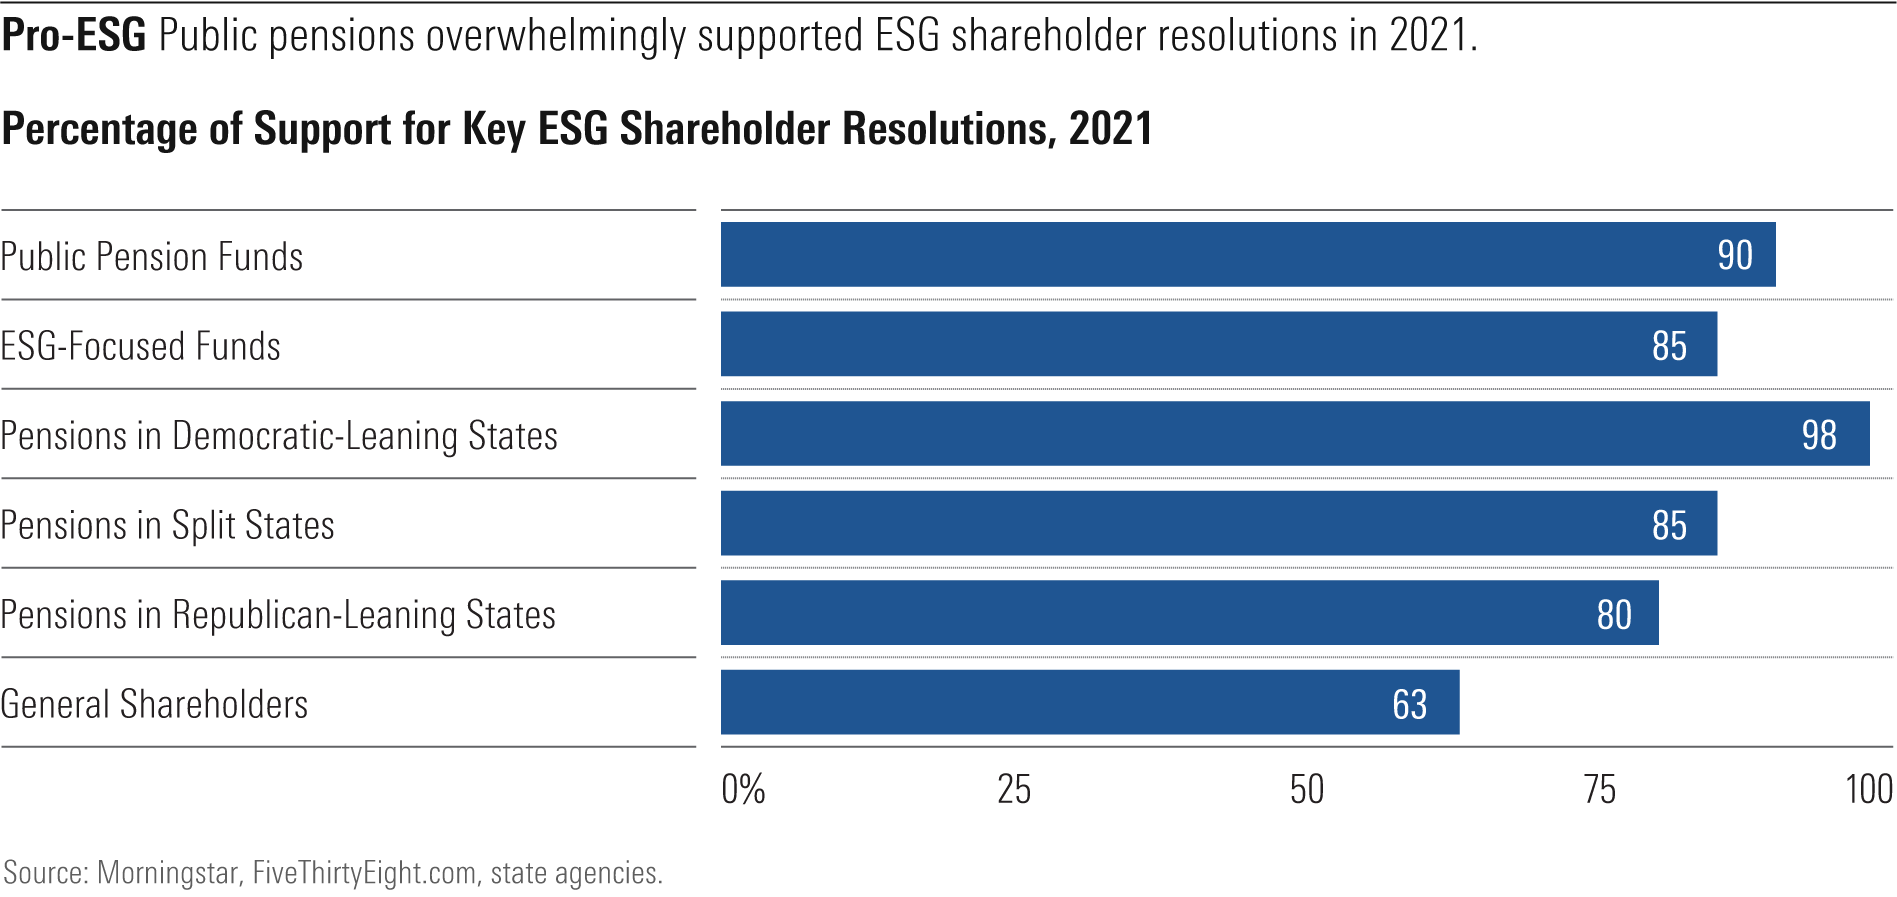 Chart shows that public pensions overwhelmingly supported ESG shareholder resolutions in 2021.